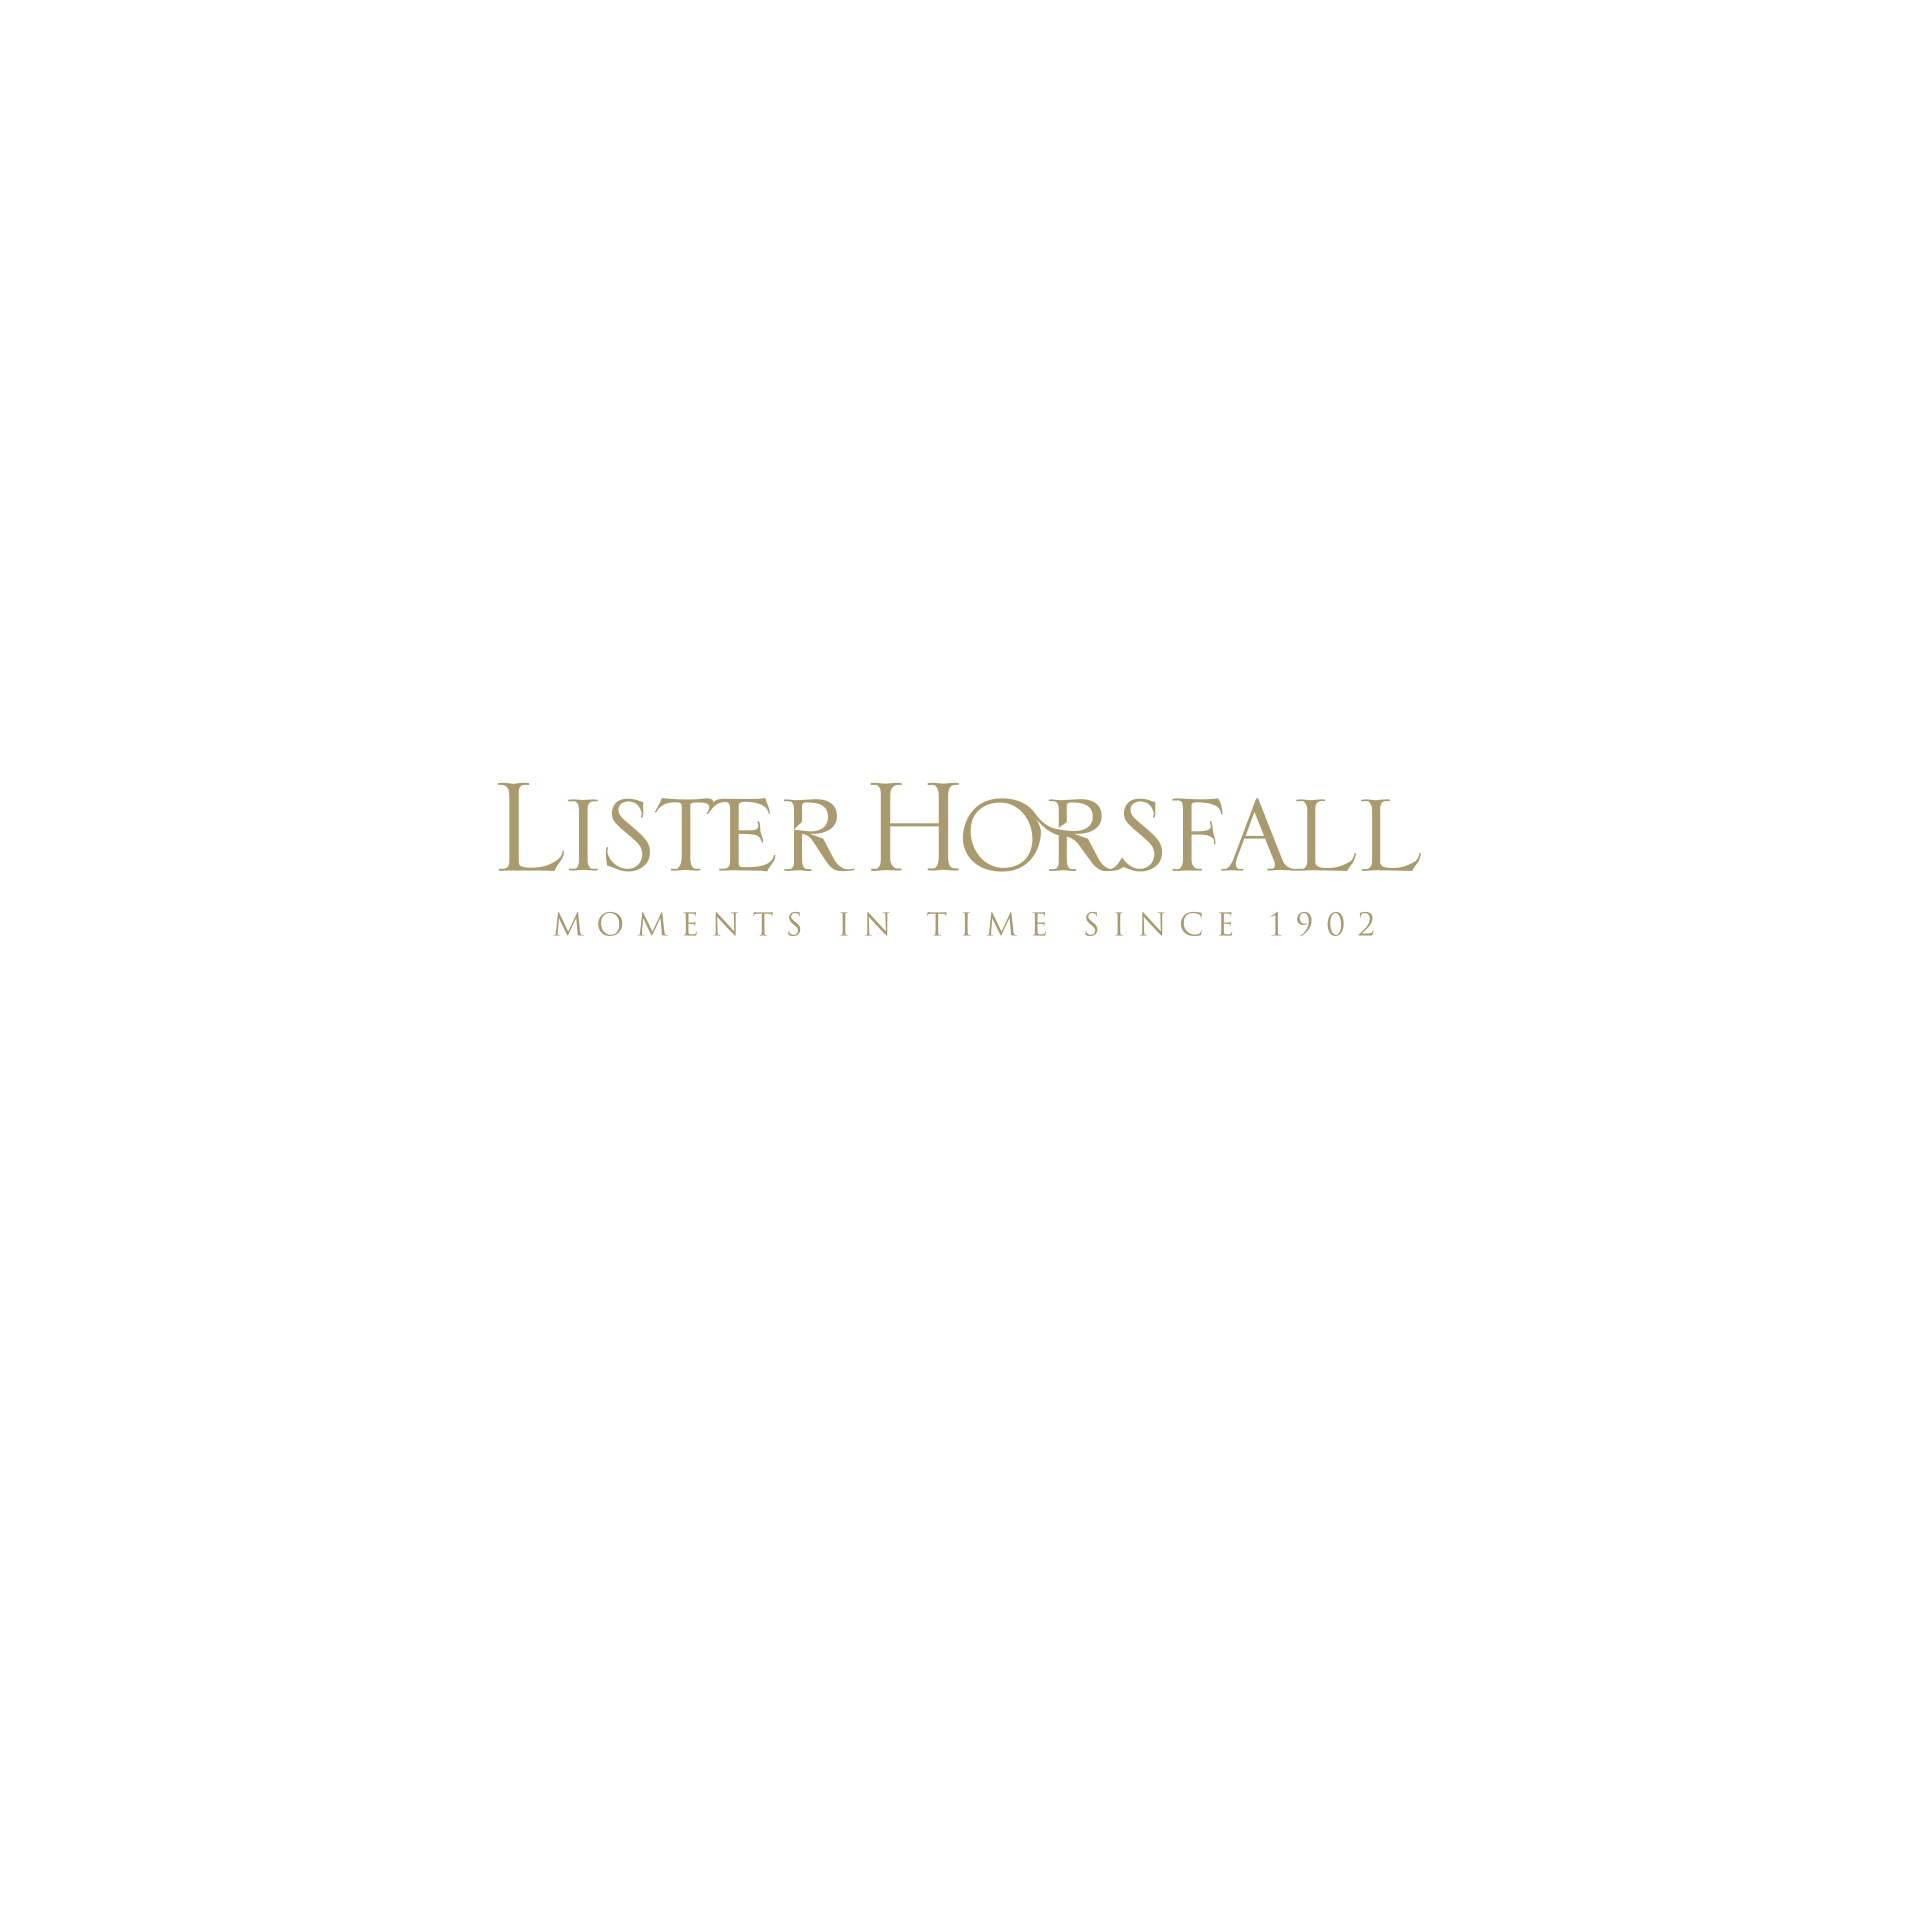 Lister Horsfall - Halifax, West Yorkshire HX1 1TH - 01422 355304 | ShowMeLocal.com